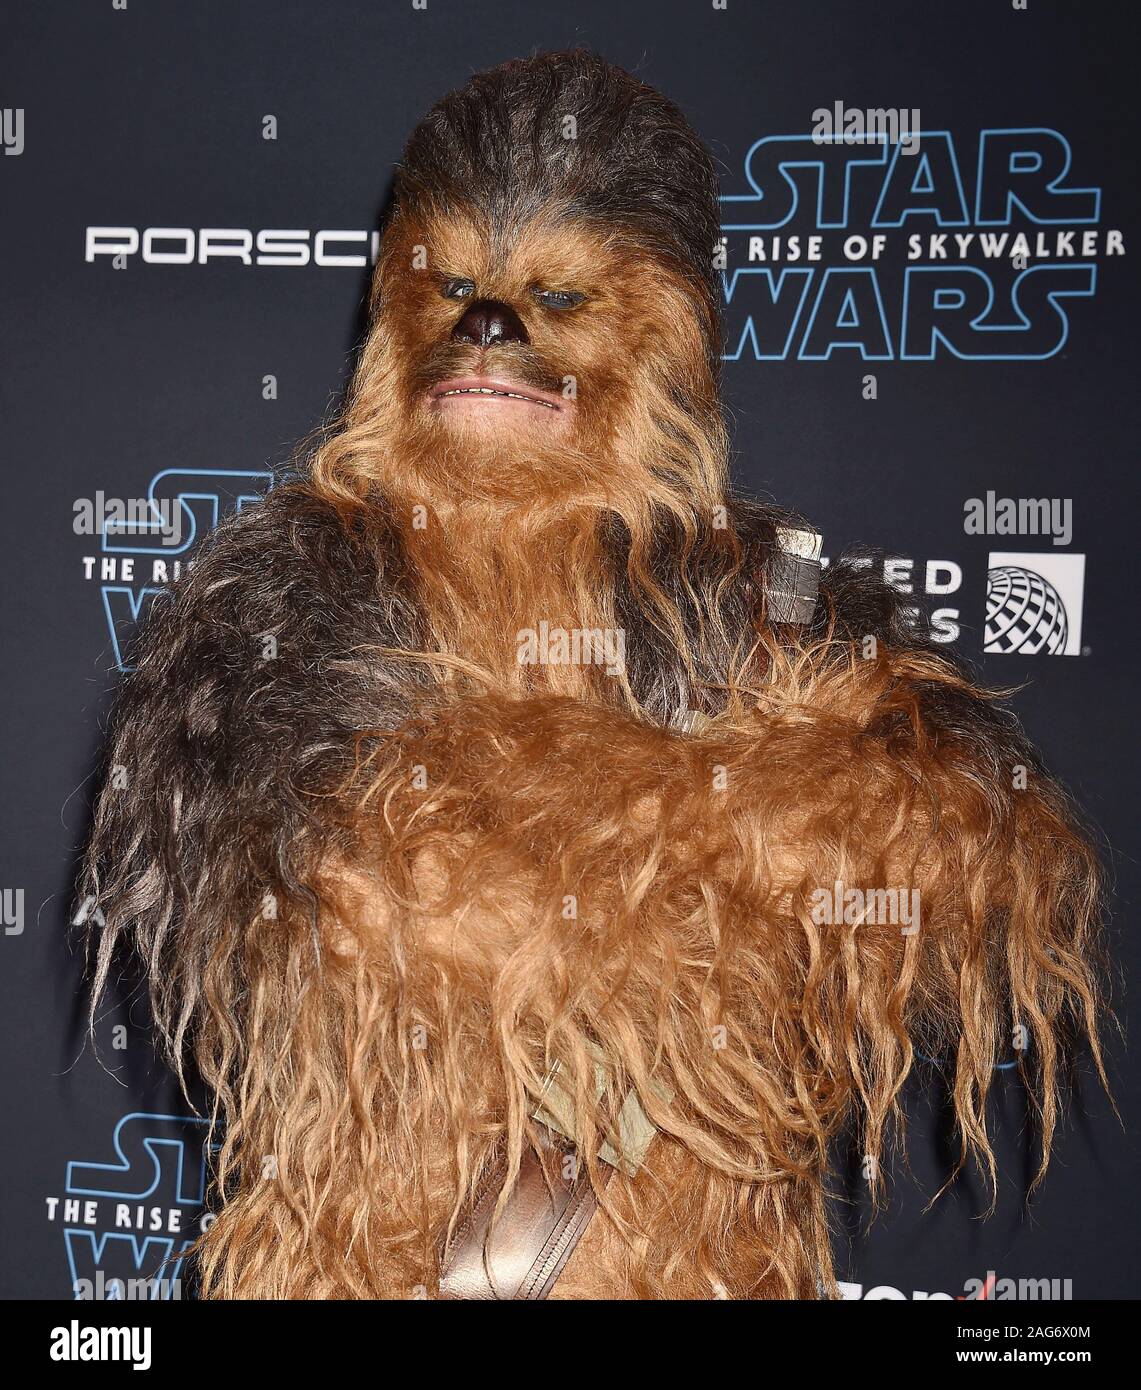 HOLLYWOOD, CA - DECEMBER 16: Chewbacca attends the Premiere of Disney's 'Star Wars: The Rise Of Skywalker' at the El Capitan Theatre on December 16, 2019 in Hollywood, California. Stock Photo